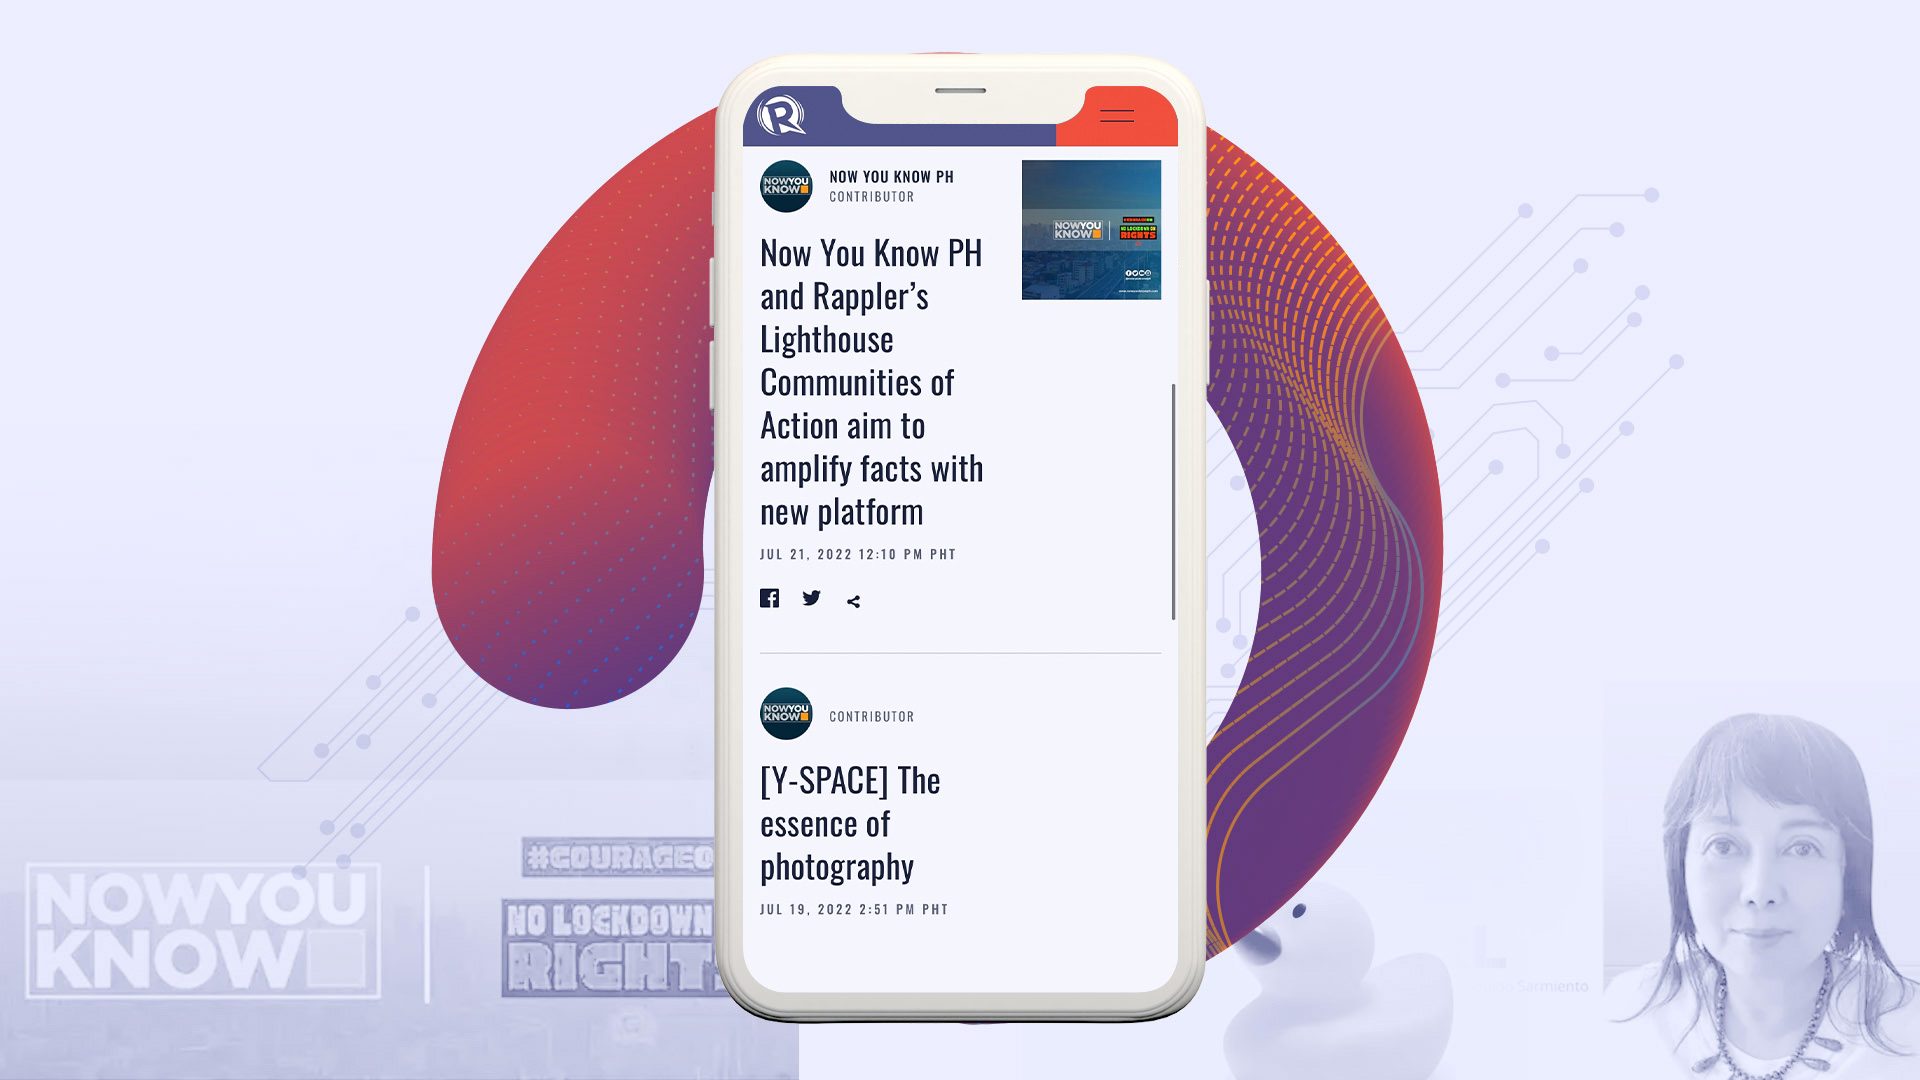 Now You Know PH joins Rappler’s Lighthouse Communities of Action